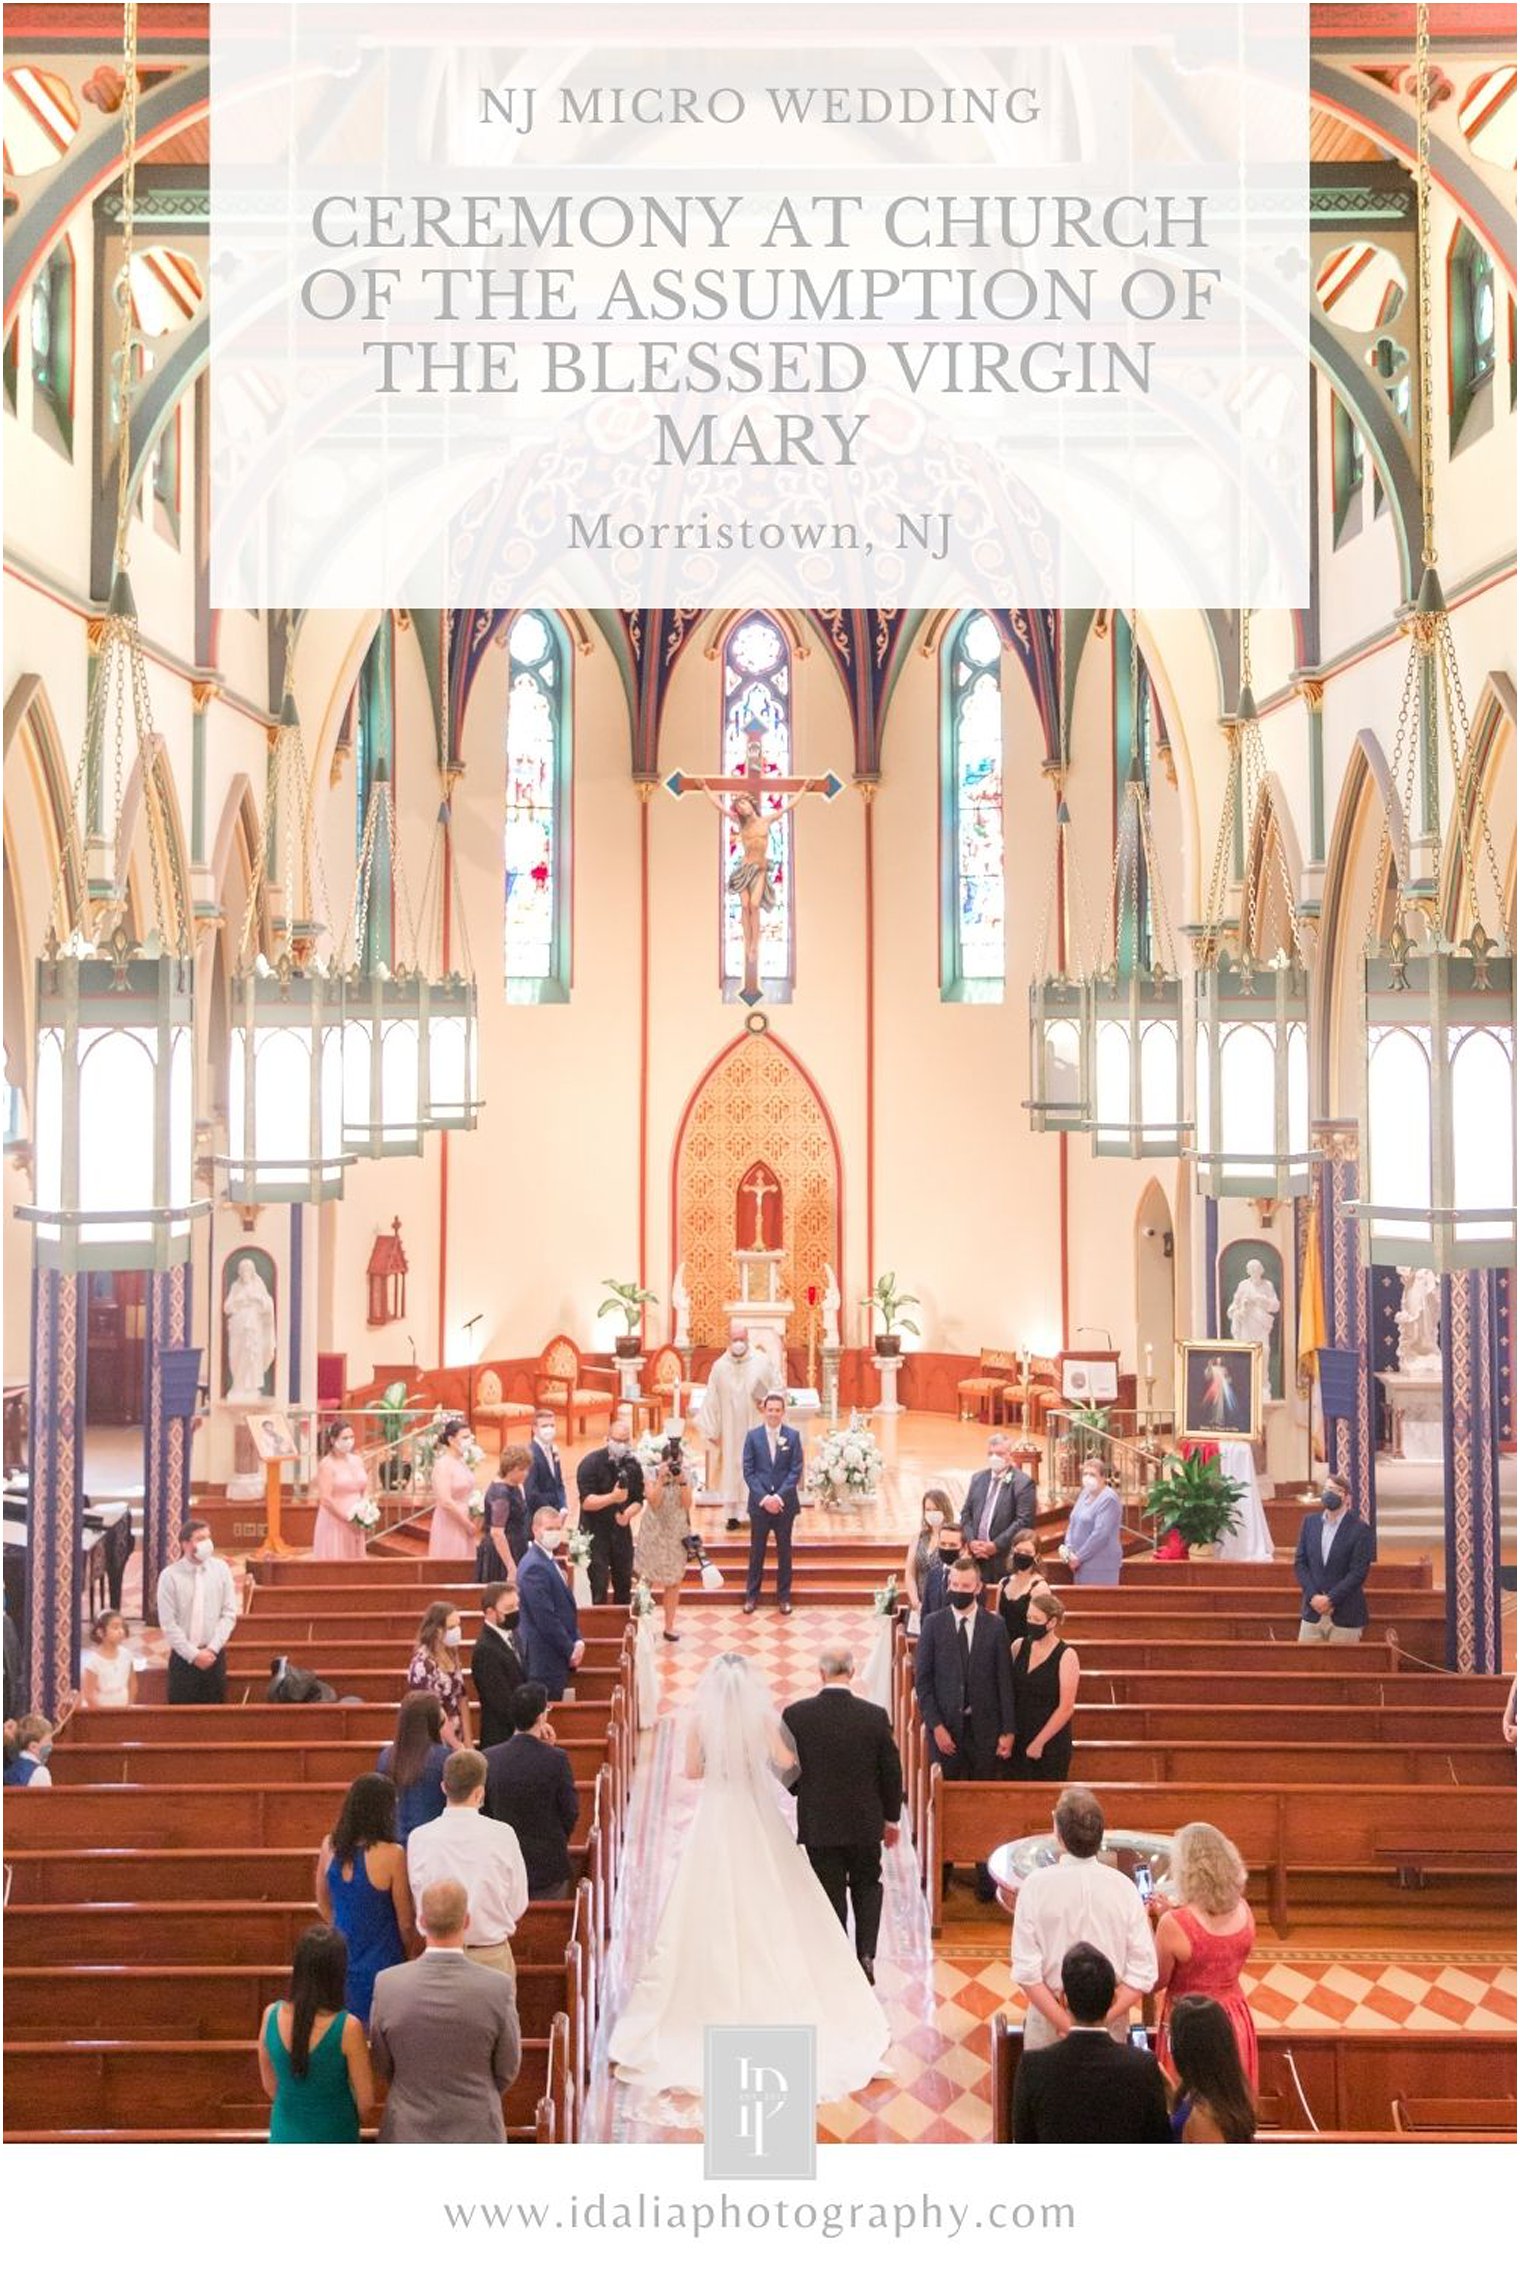 Wedding ceremony at Church of the Assumption of the Blessed Virgin Mary in Morristown NJ